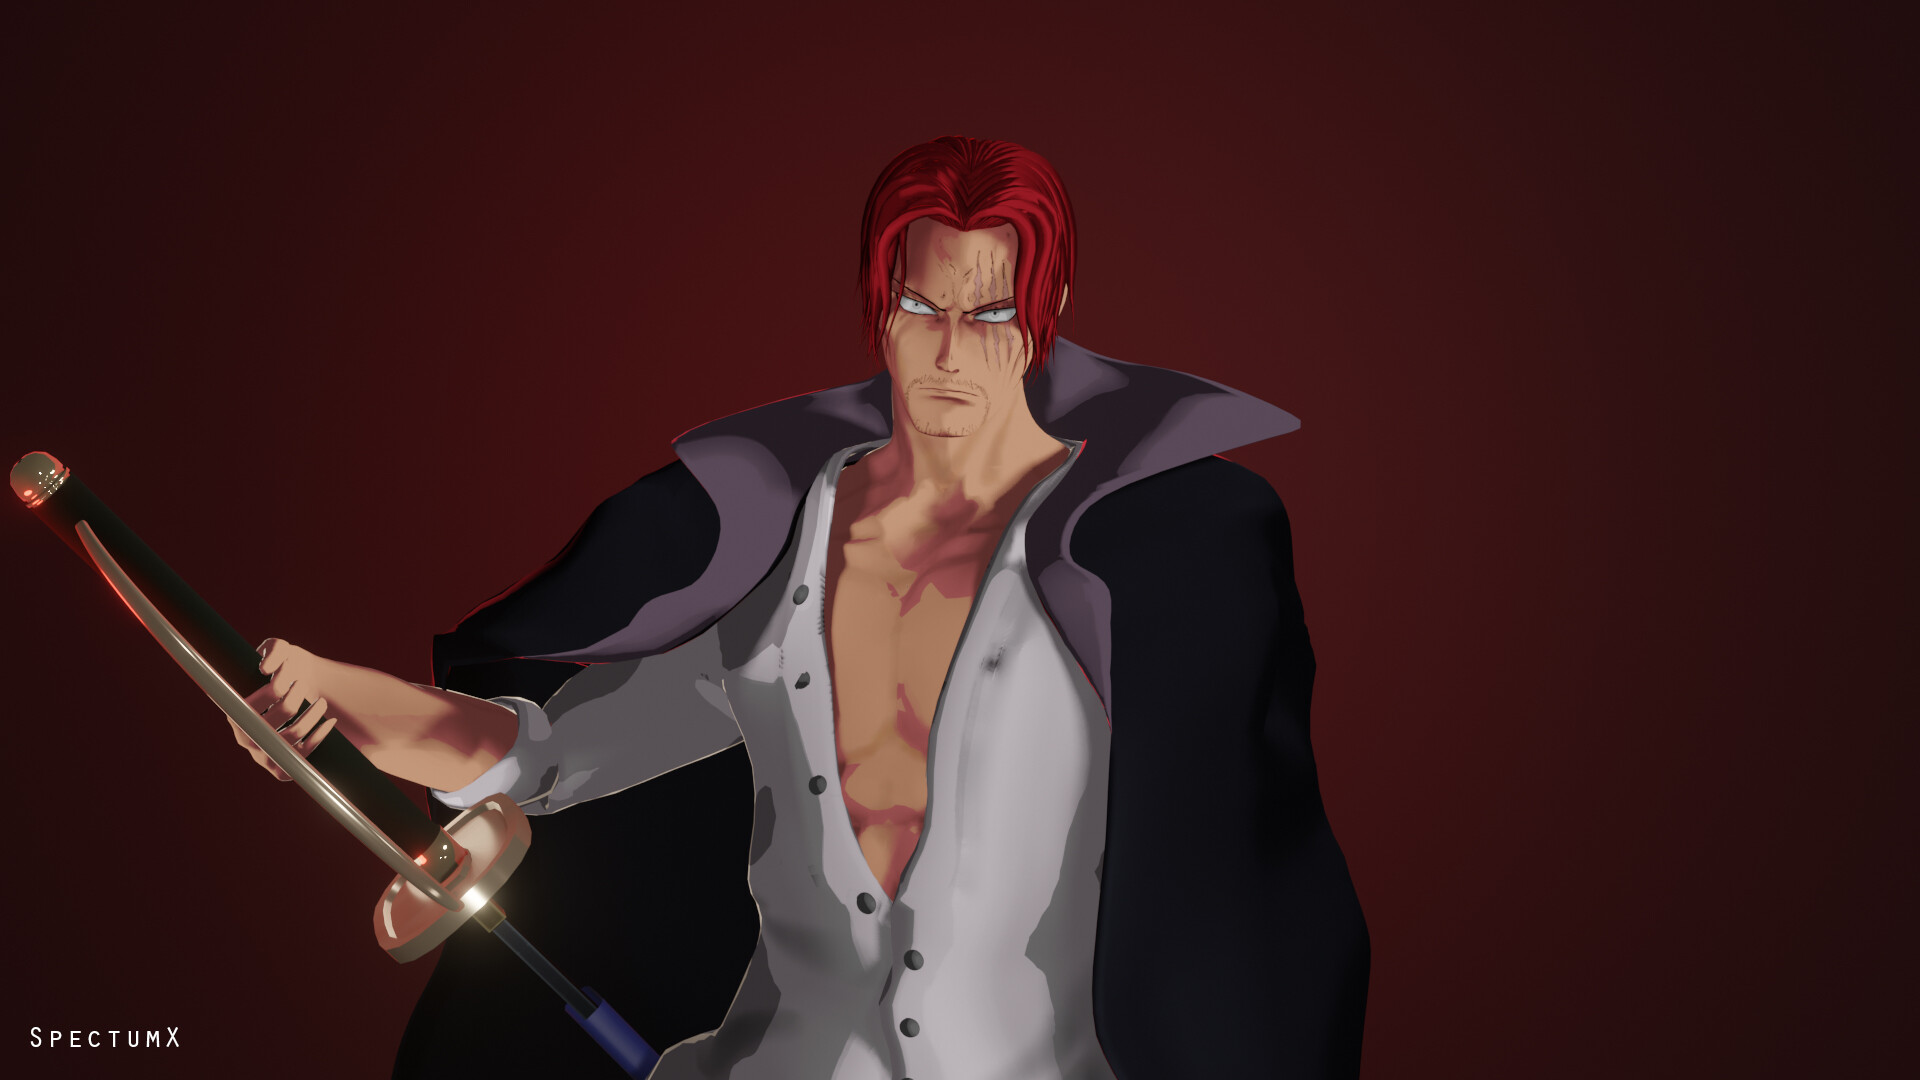 ArtStation - Shanks from one piece